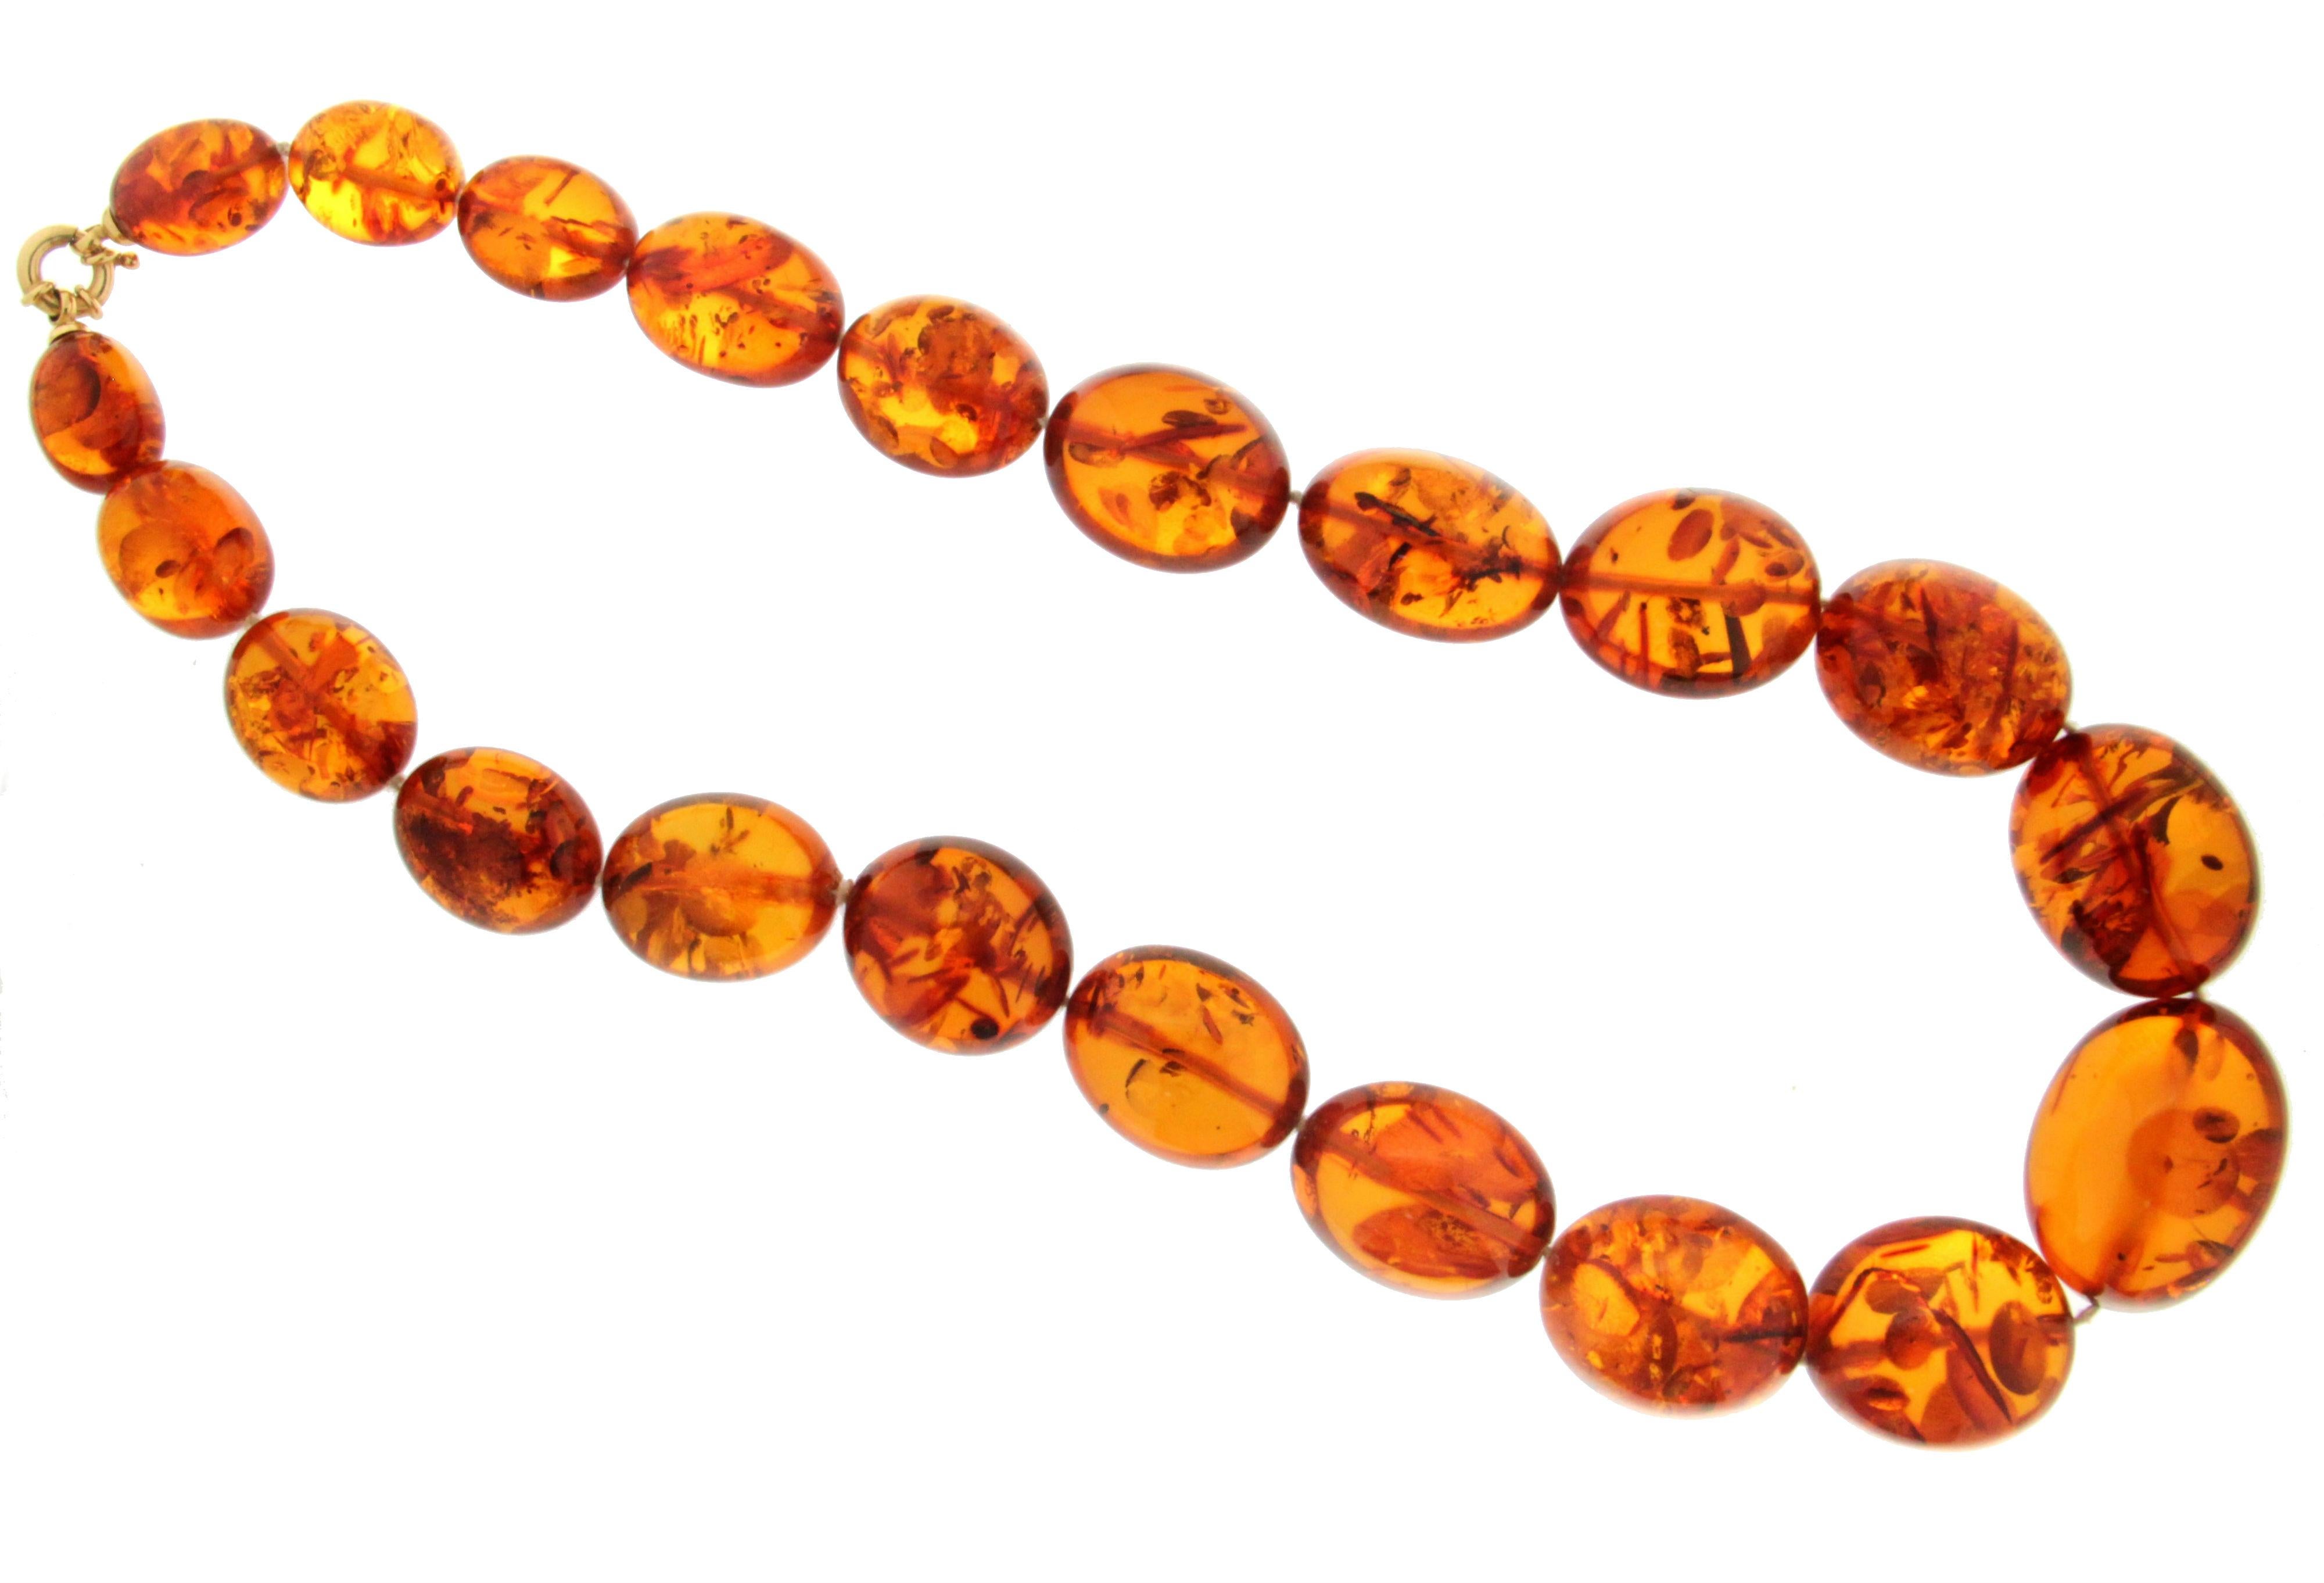 Amber 18 Karat Yellow Gold Rope Necklace
The biggest piece of amber width 3.80 cm and length 2.60 cm
The smallest piece of amber width 2.40 cm and length 1.50 cm

Necklace weight 170 grams
Necklace length 65 cm